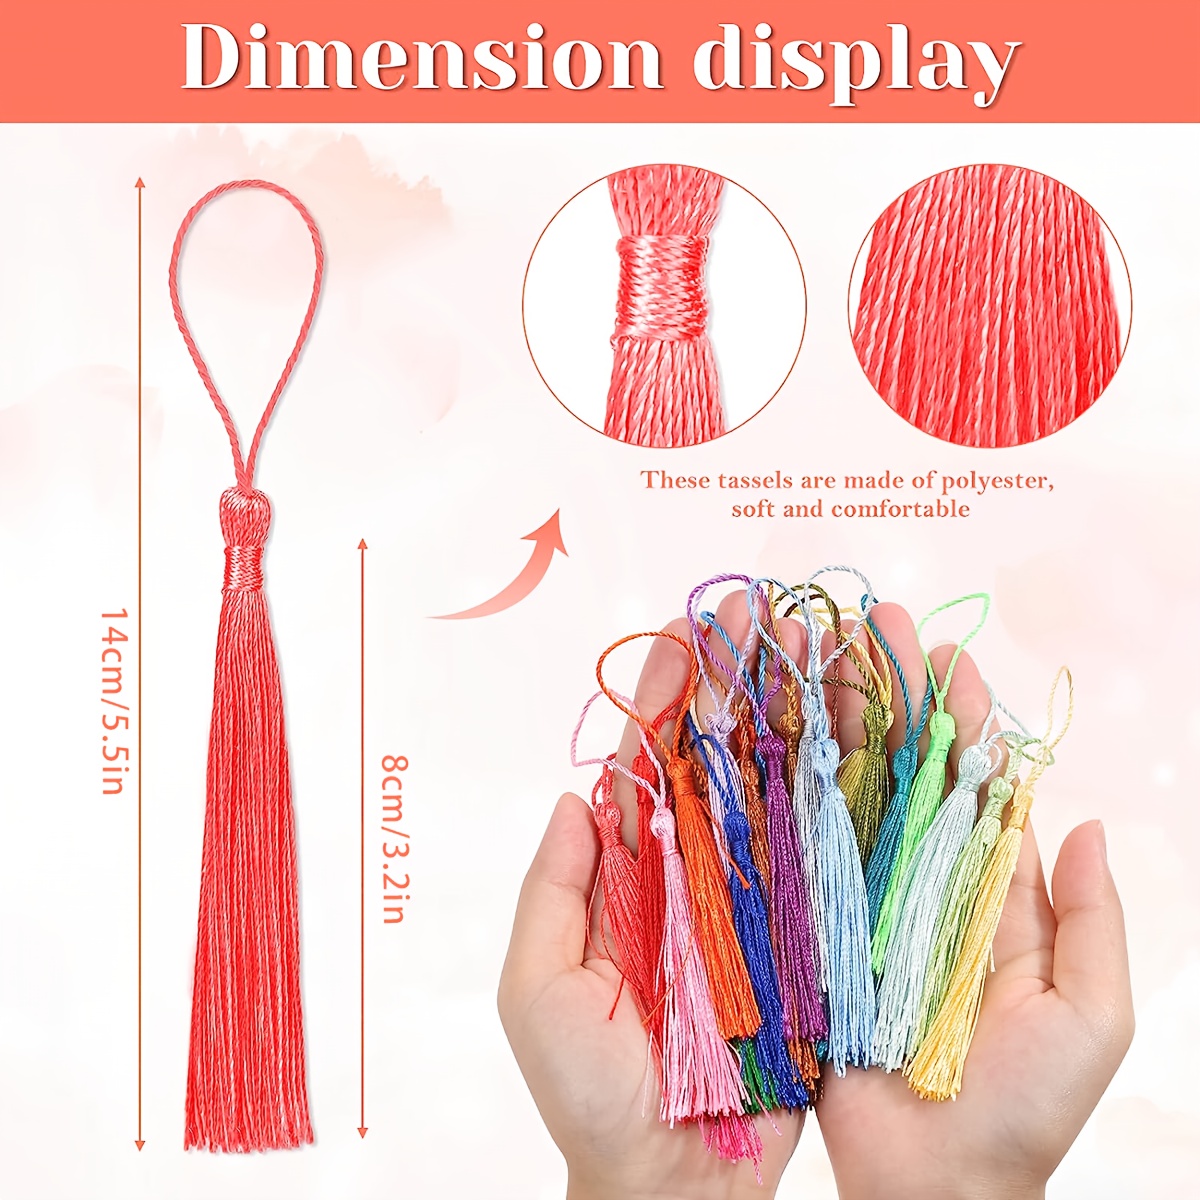 50 Pcs Handmade Red Chinese Knots Soft Tassels Holiday Gift For